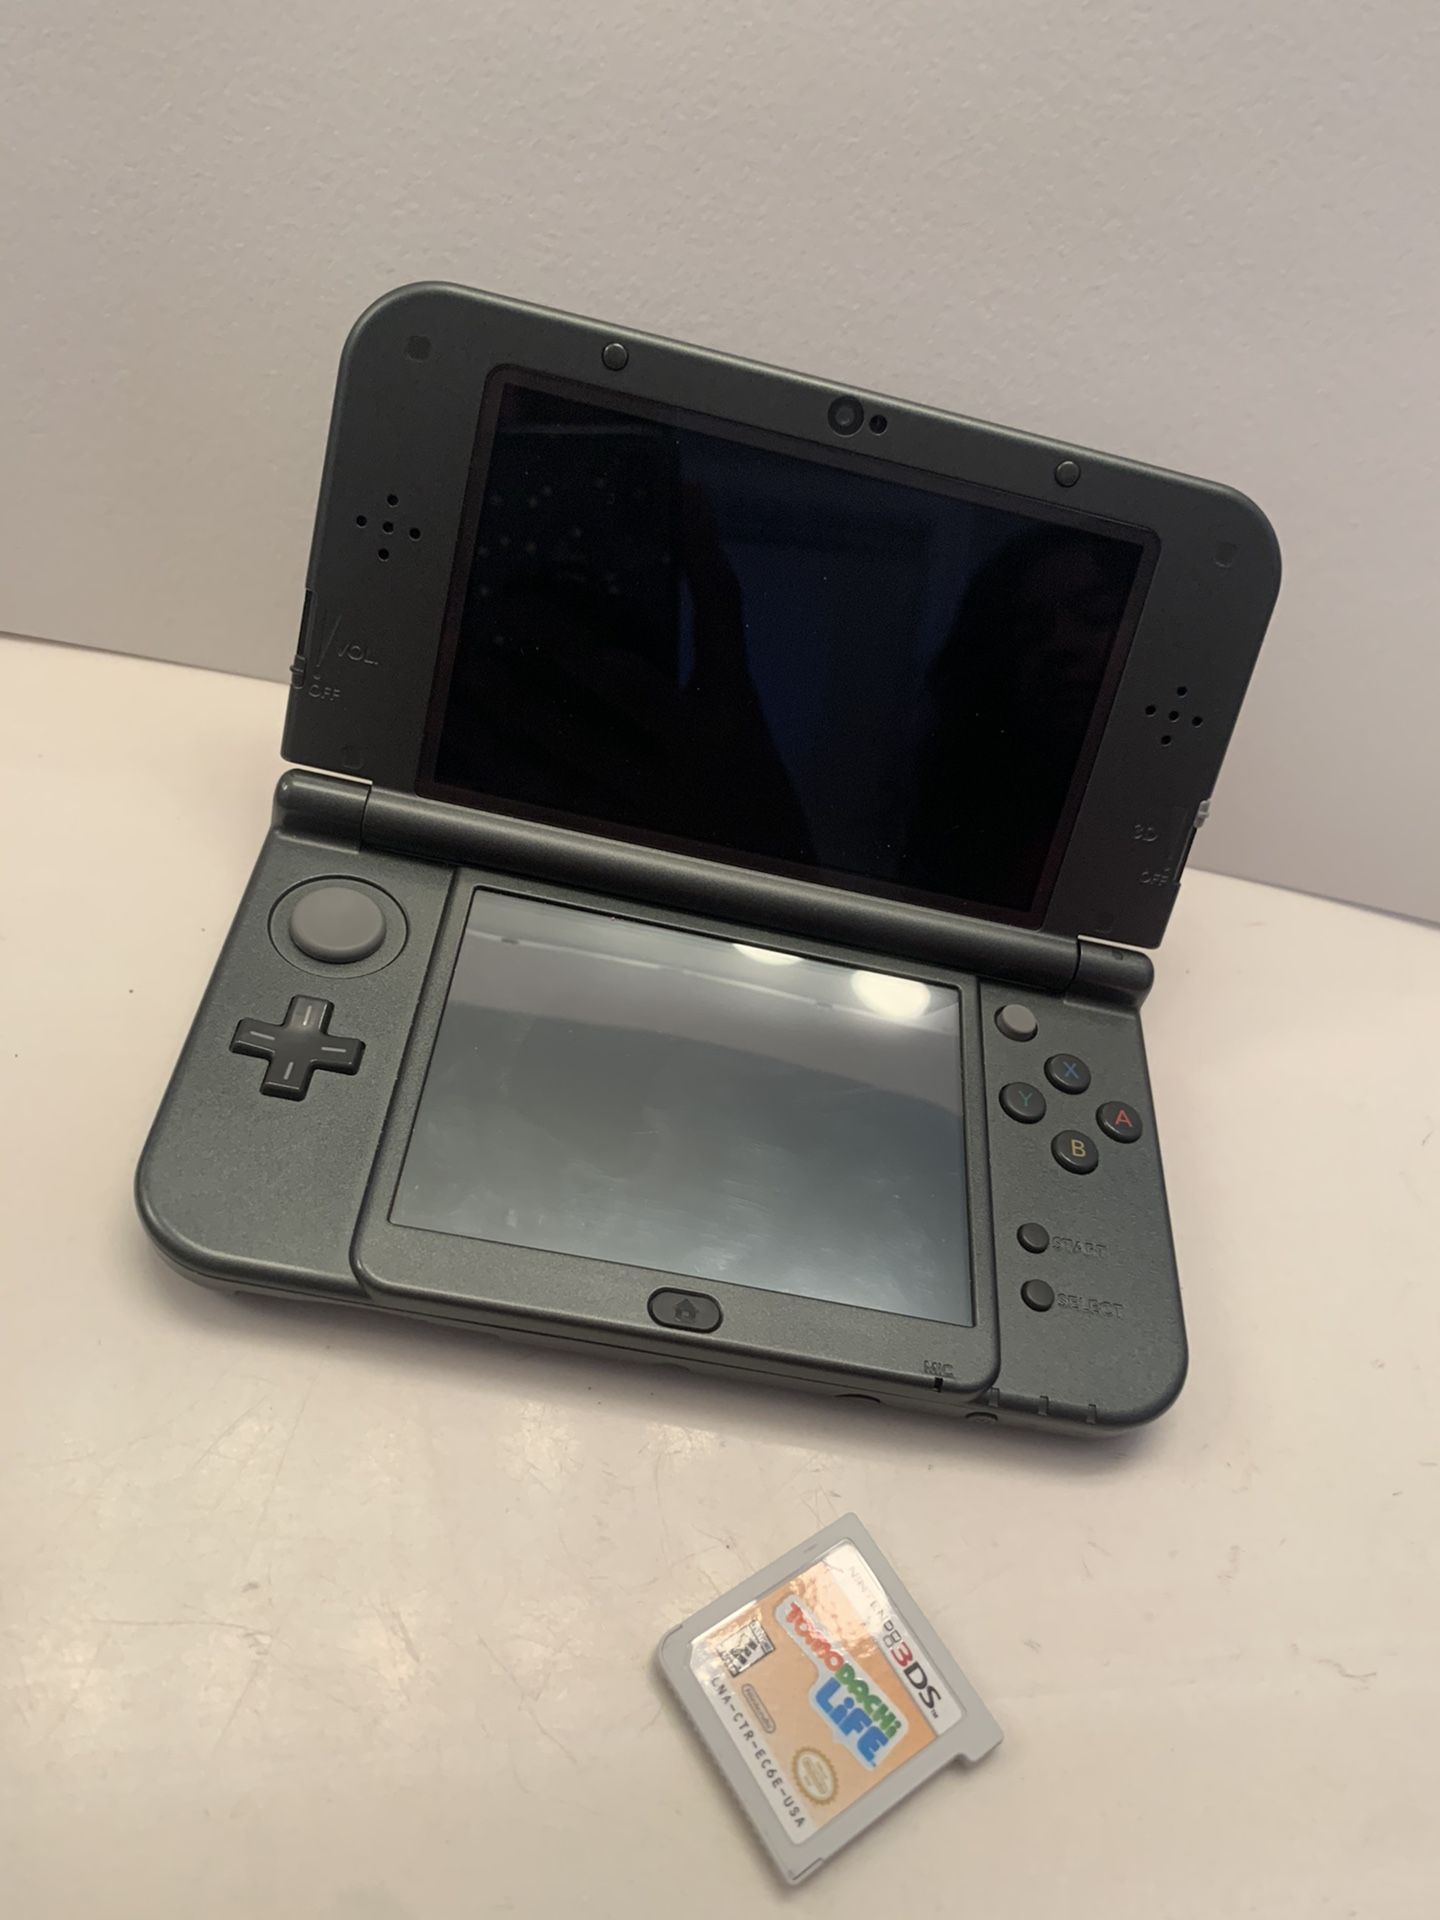 Nintendo 3DS XL with TomoDachi Life Game